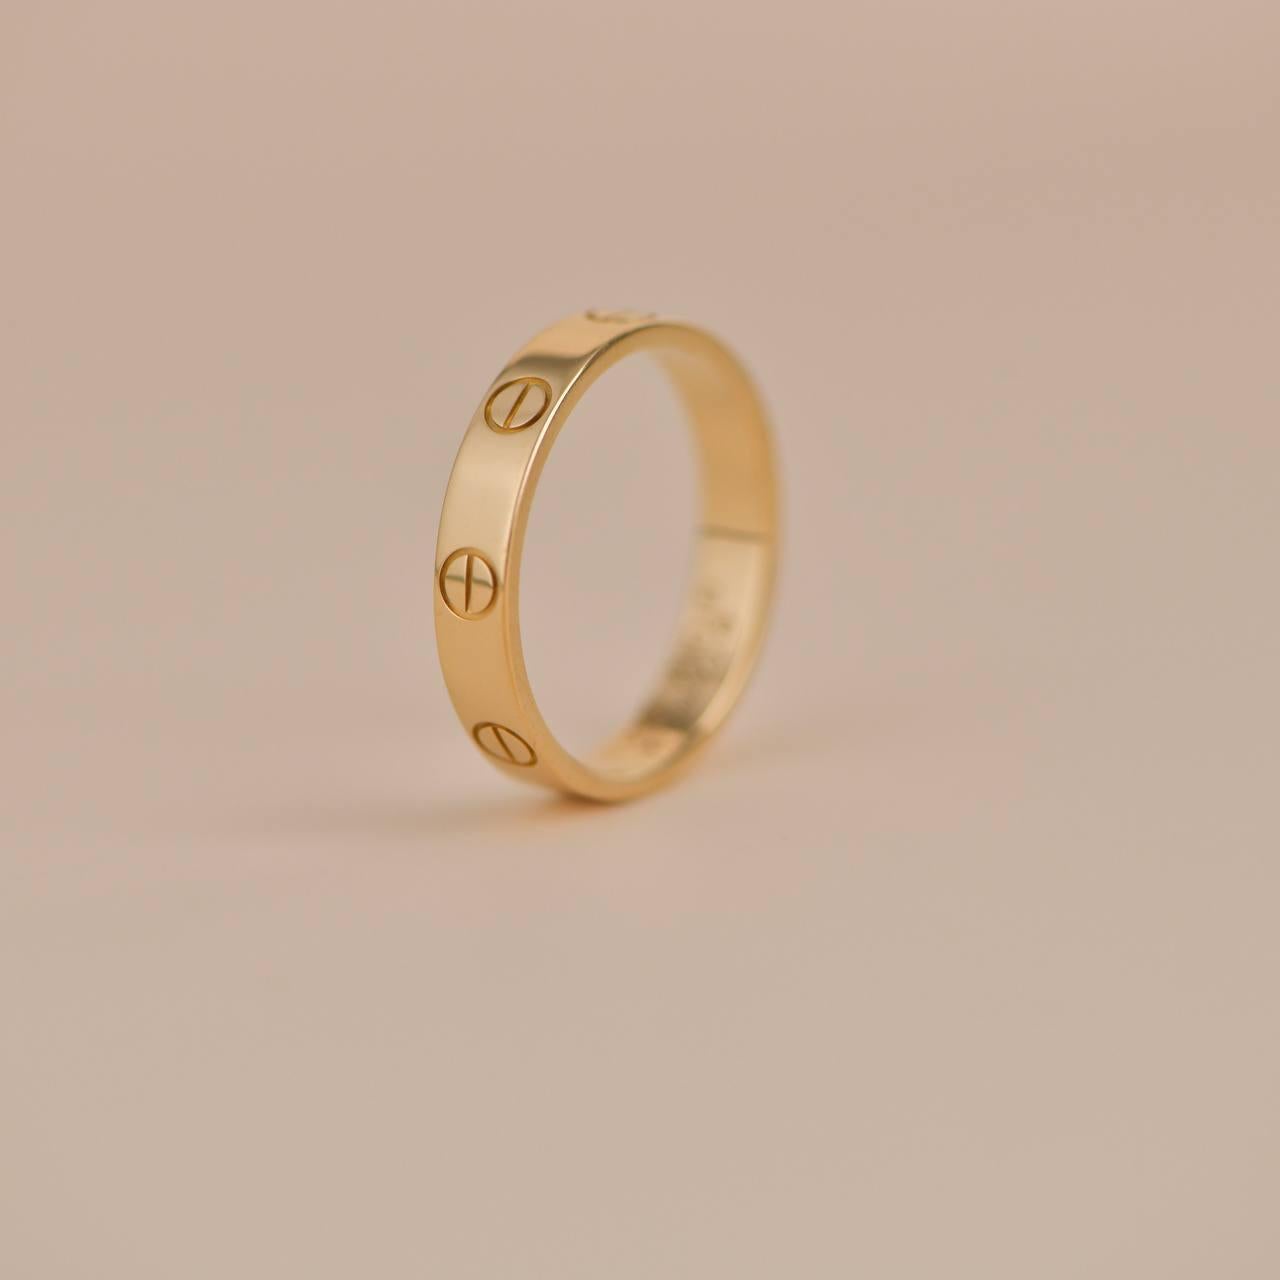 55 size ring